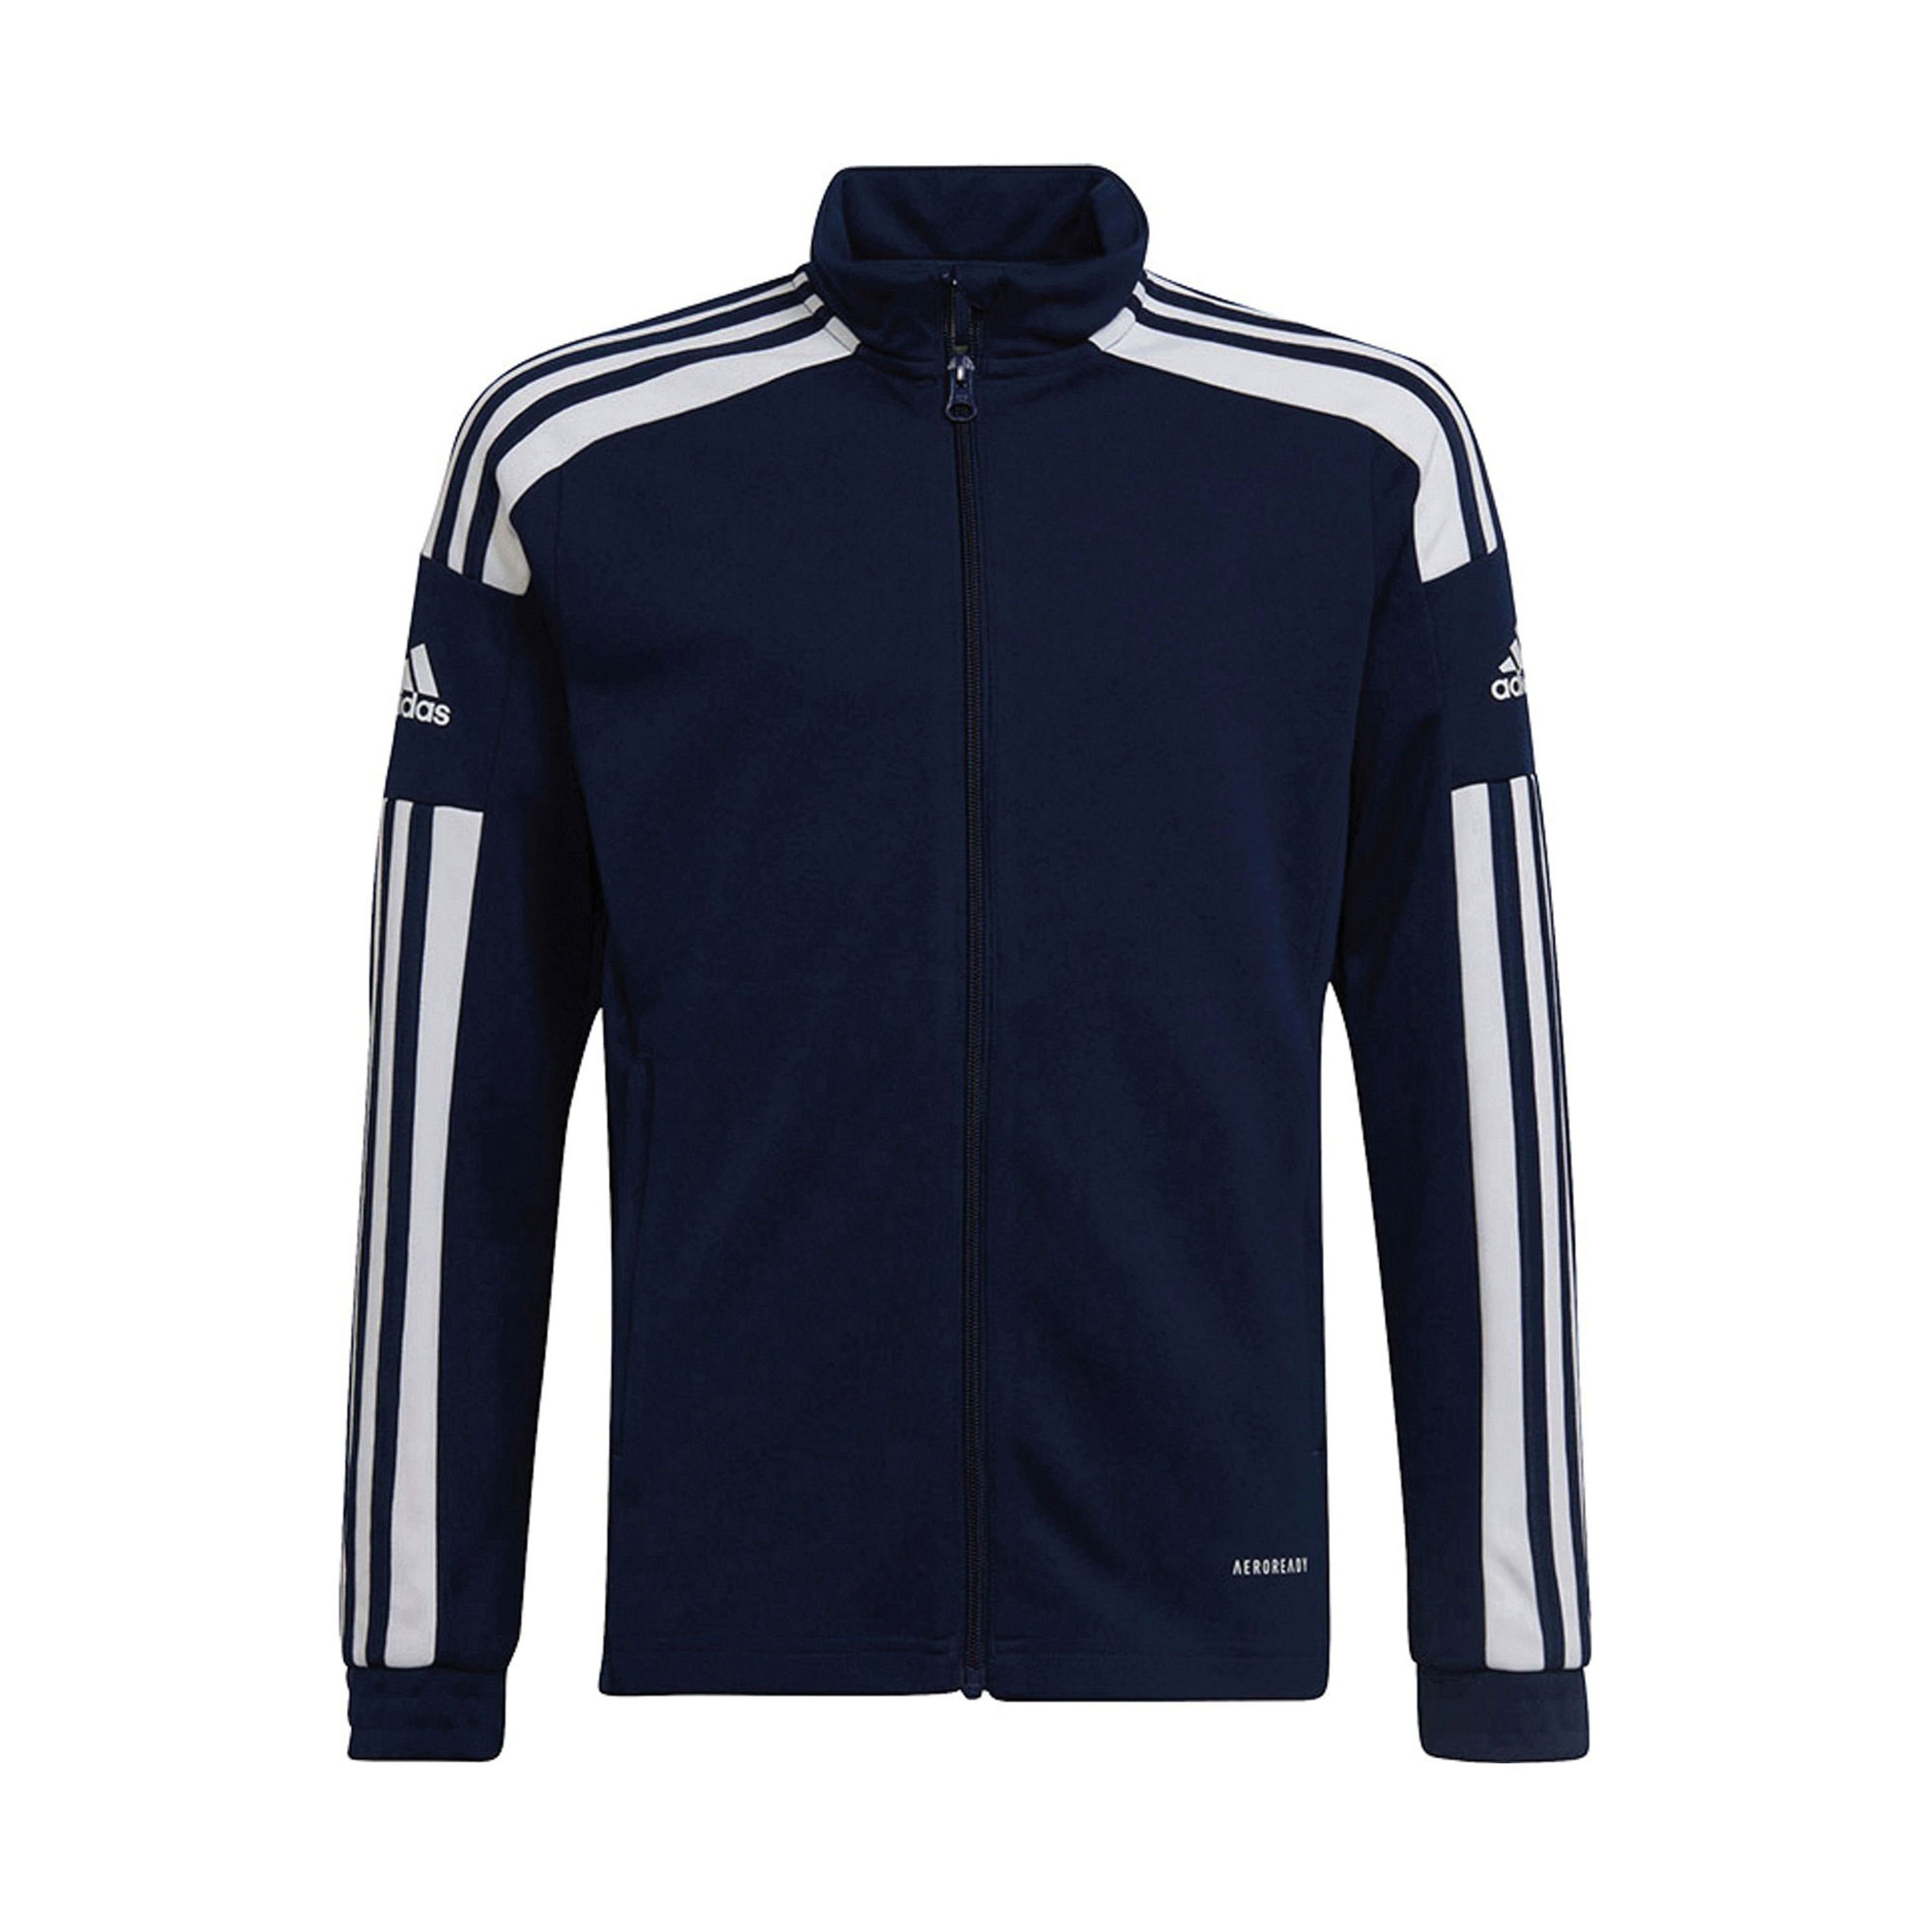 Adidas Perfor ce Junior sportvest donkerblauw wit Gerecycled polyester Opstaande kraag 164